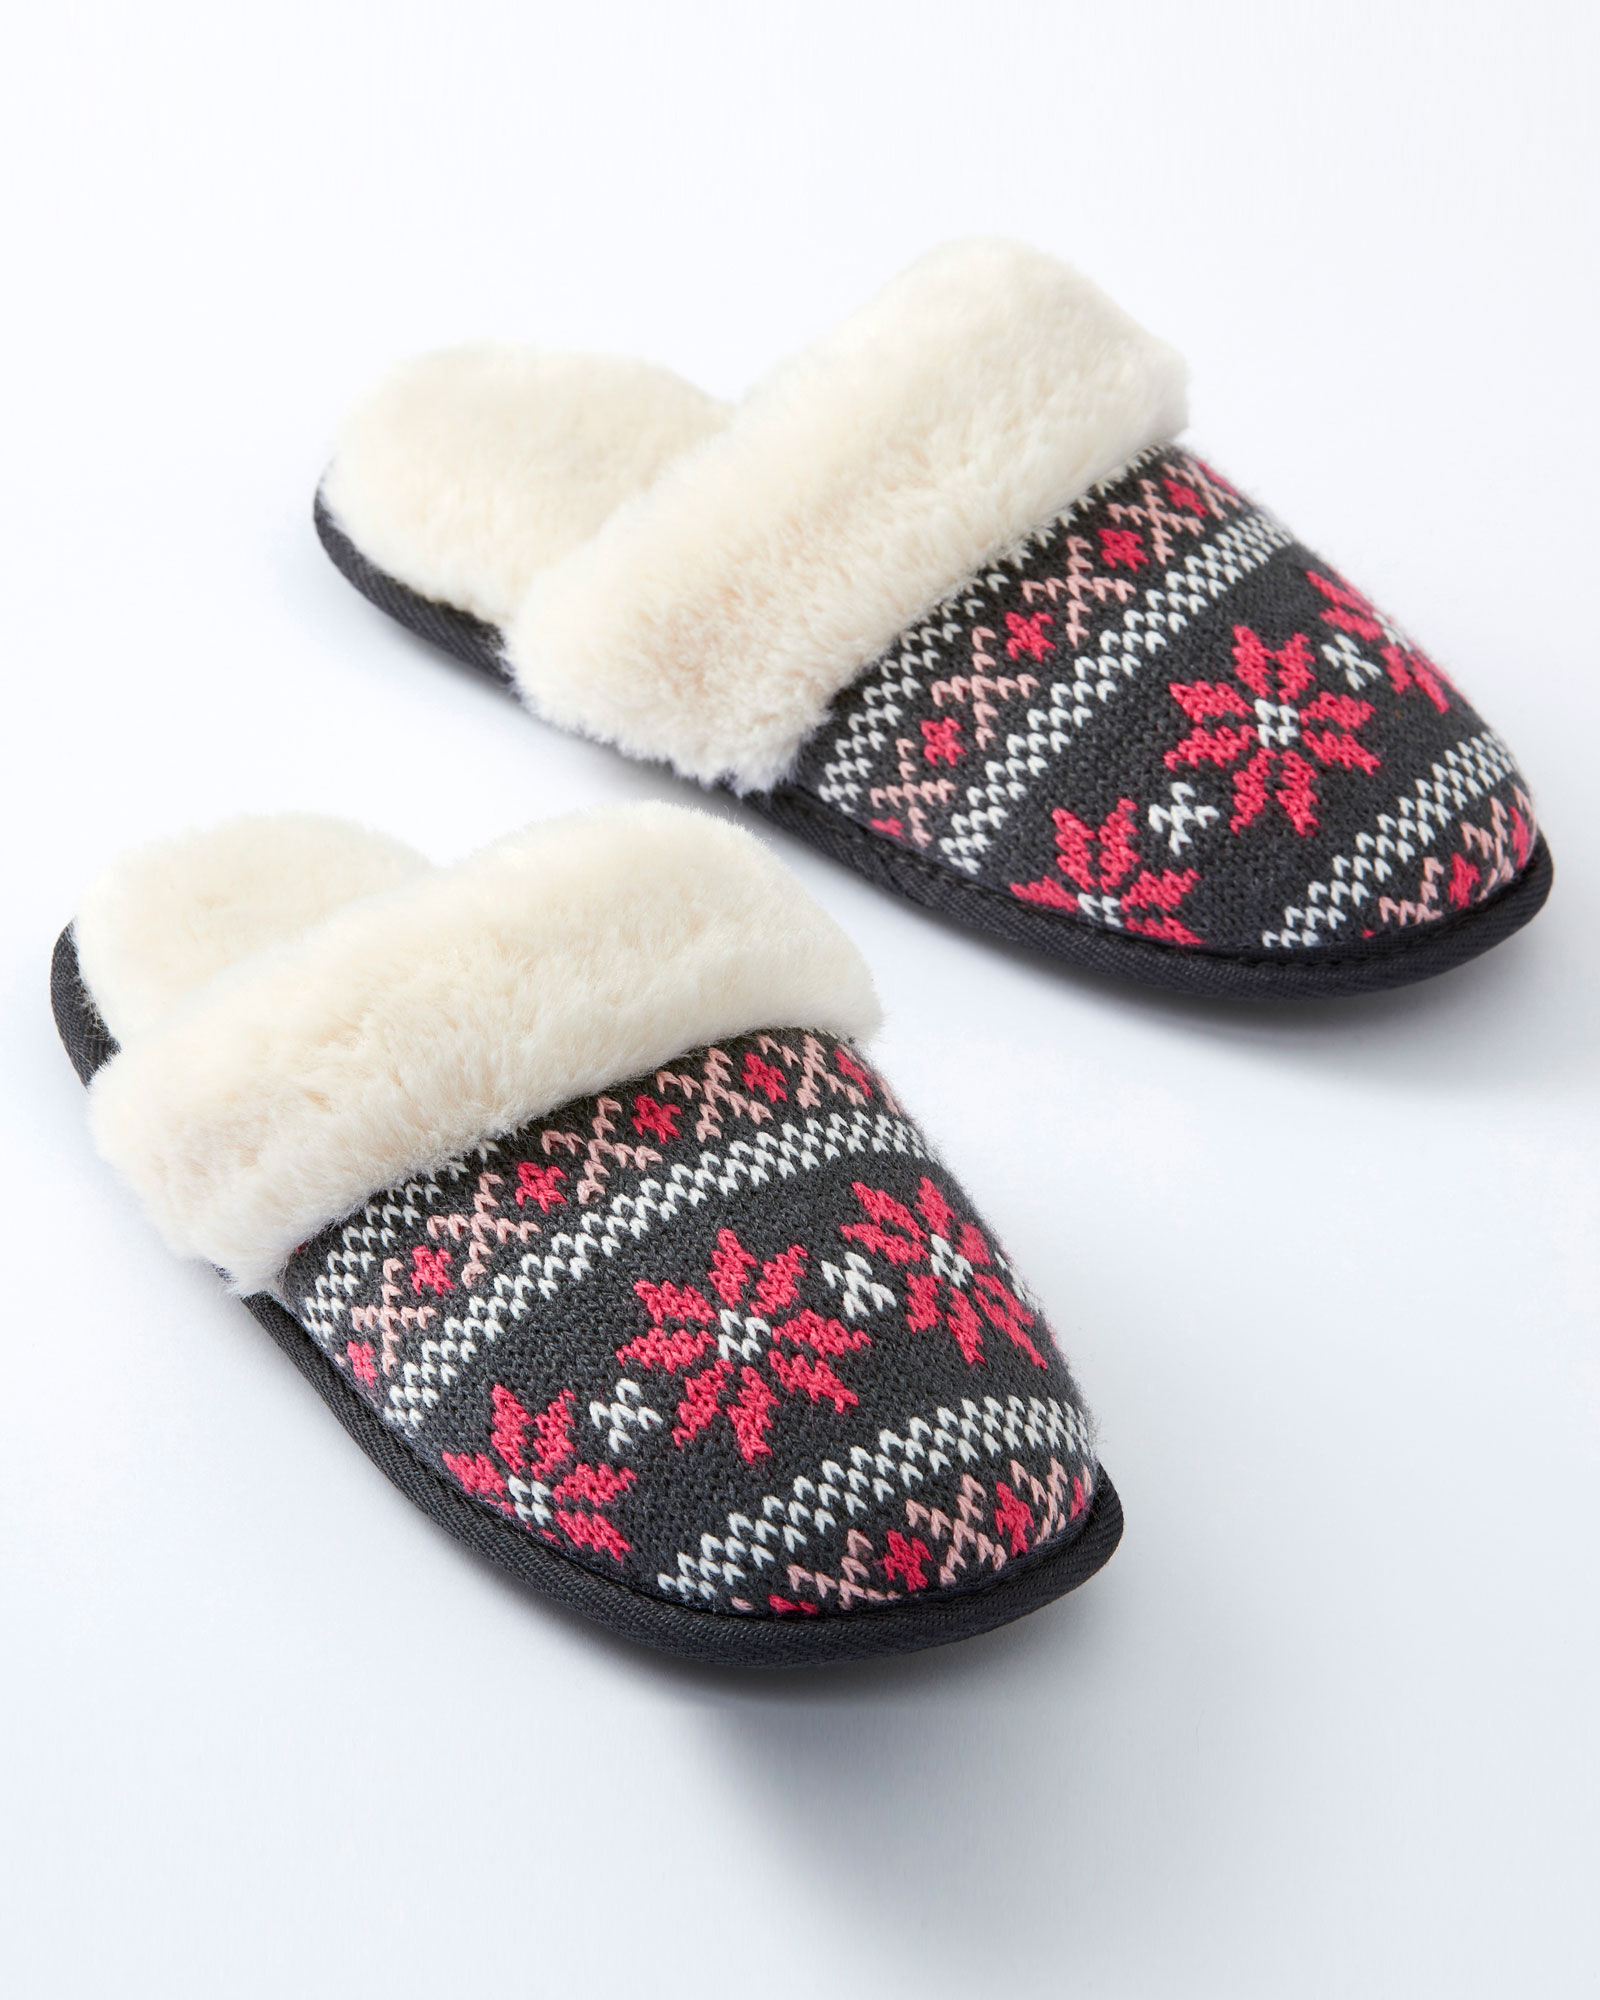 cotton traders ladies slippers